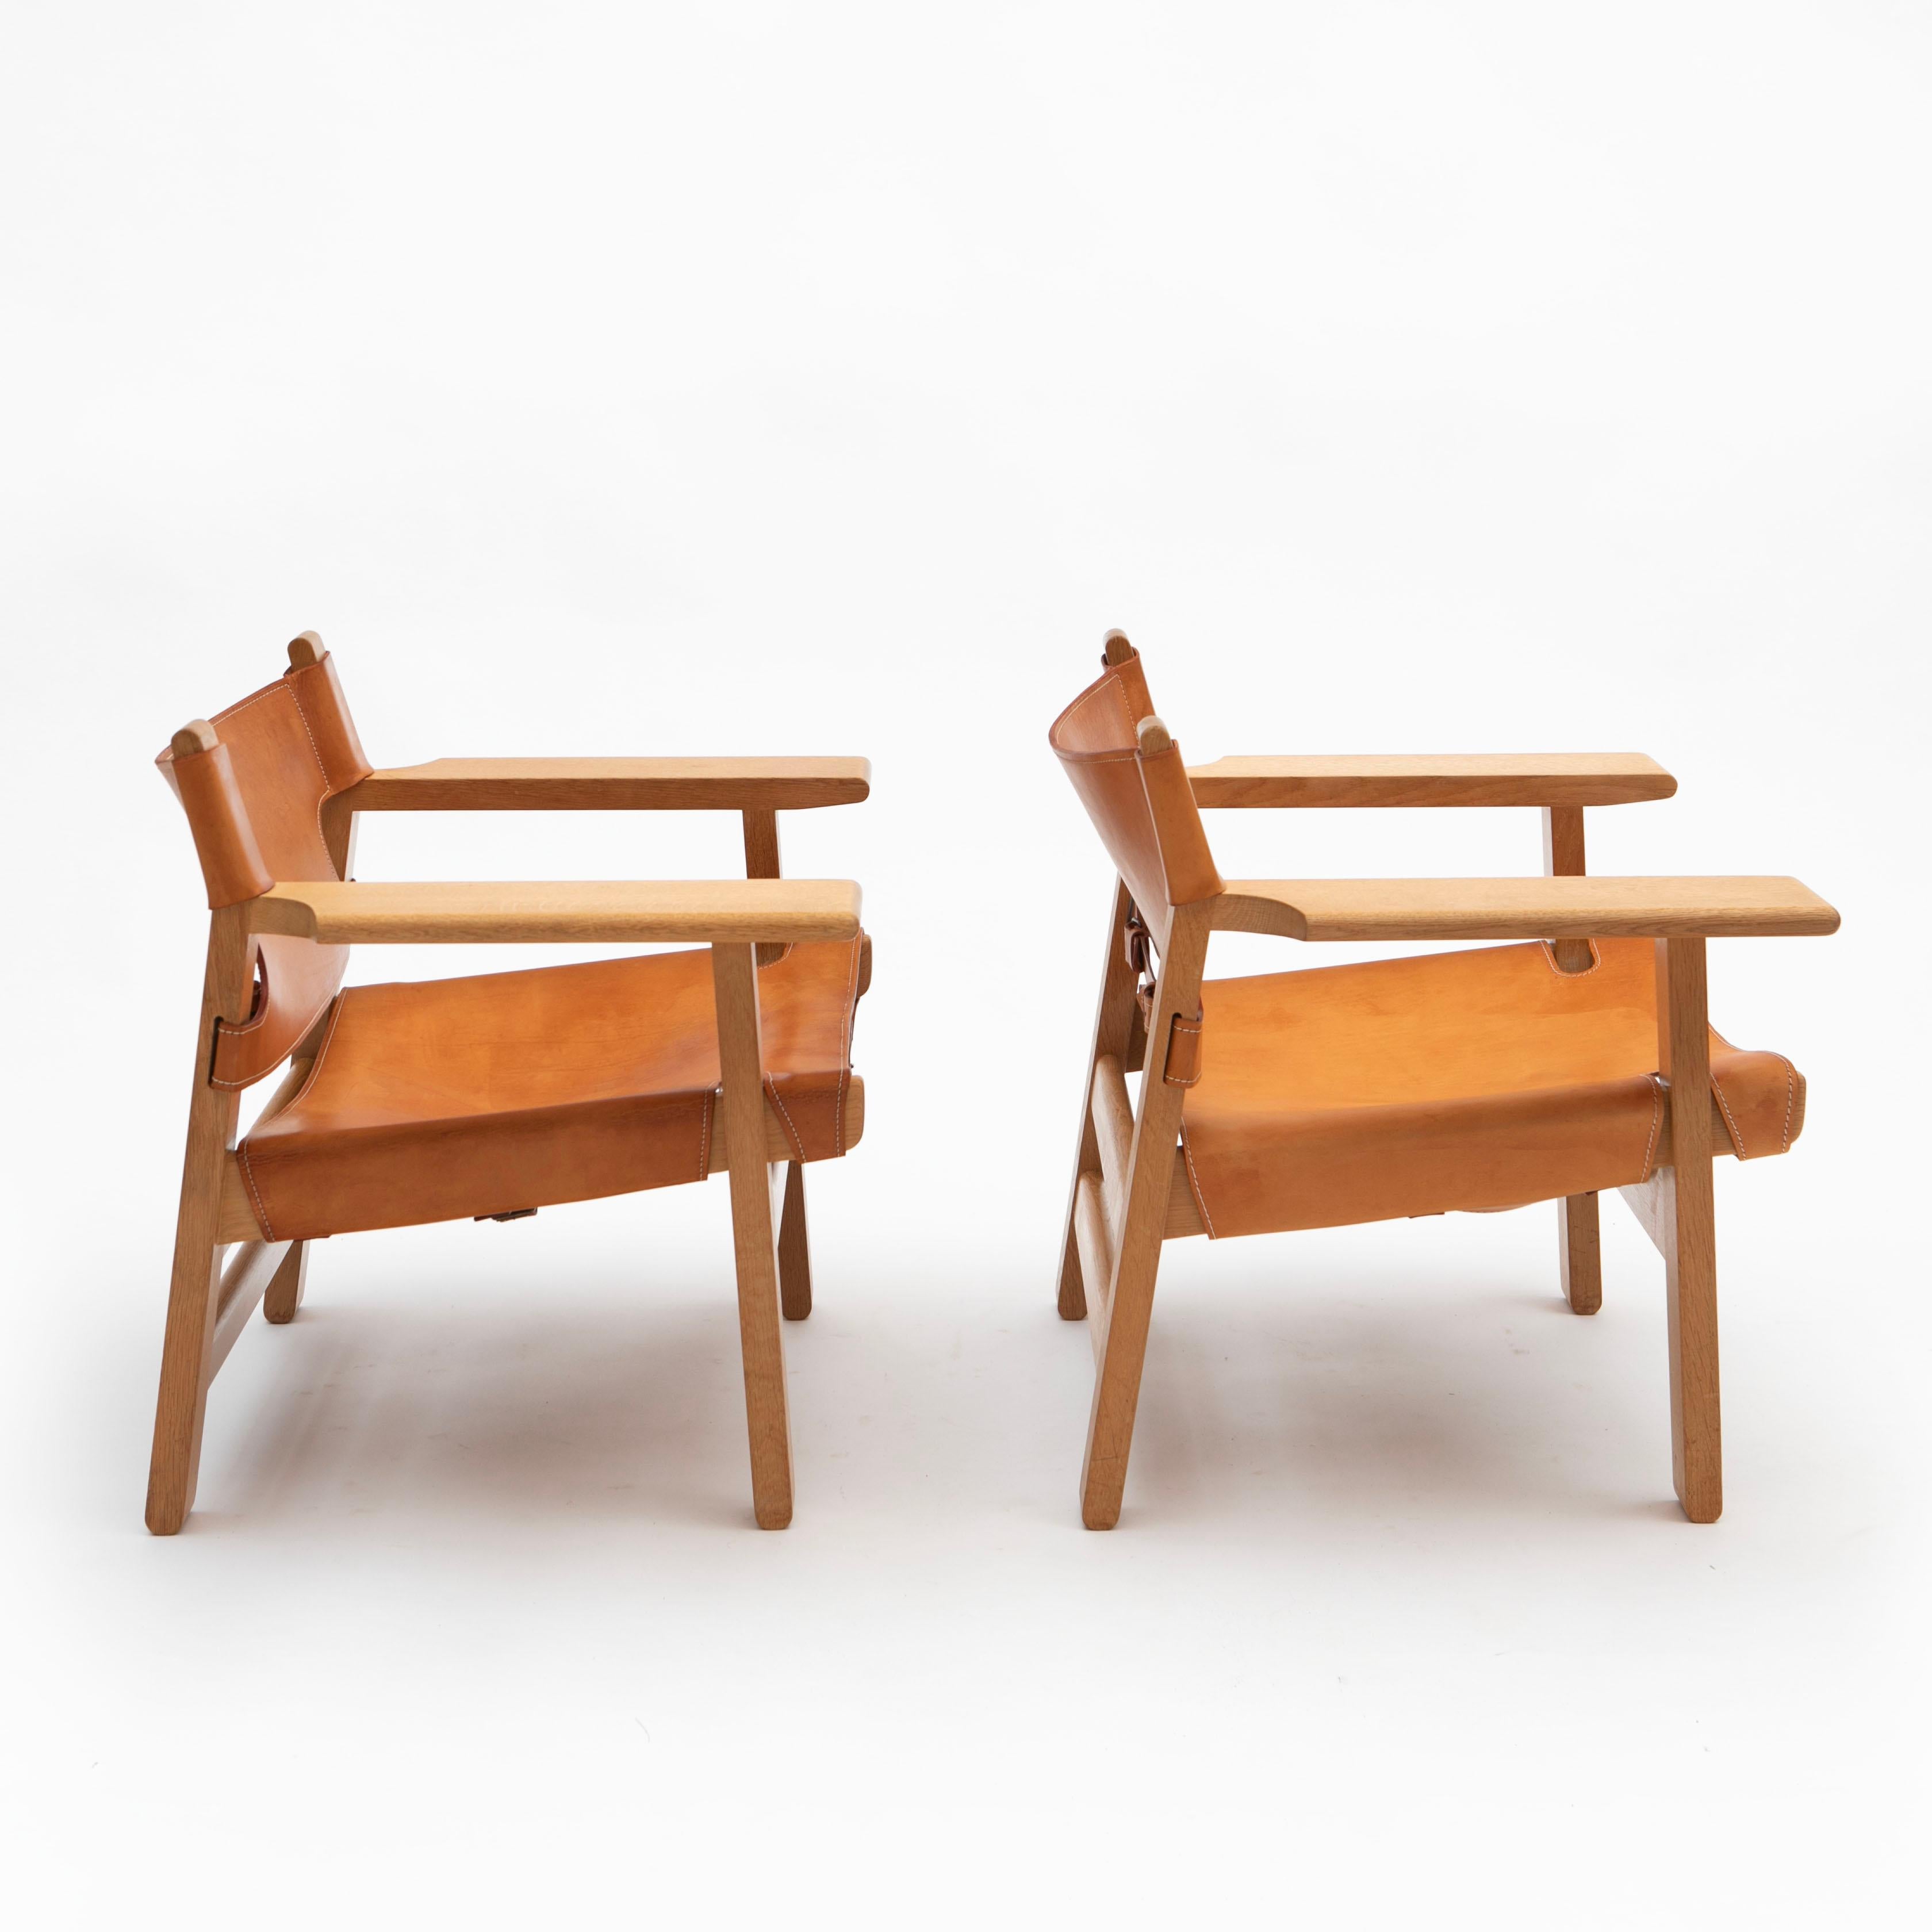 A pair of 'The Spanish Chair', model 2226.
Designed by Børge Mogensen in 1958 for Fredericia Furniture.

Made of solid oak with light saddle leather.
Original untouched condition with natural patina.

Price is for a pair (2)